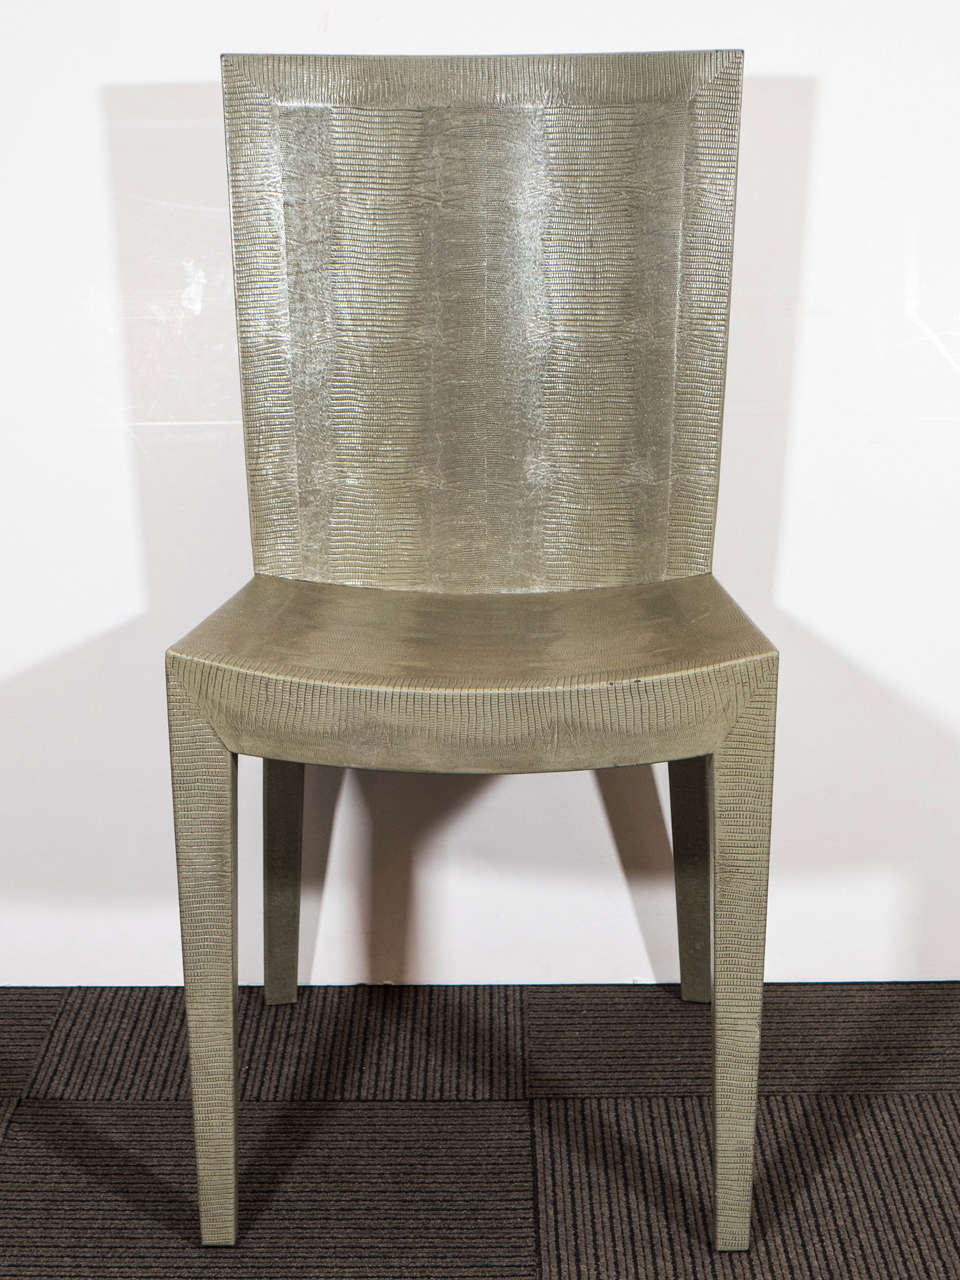 A Beautiful Set of Six Karl Springer Faux Lizard Skin Dining Chairs in a Fantastic Pale Olive Color Accented with Black Great Striations and Detail to the Skin. Signed, and Dated 1983 on a piece of tooled leather attached to the Bottom of each